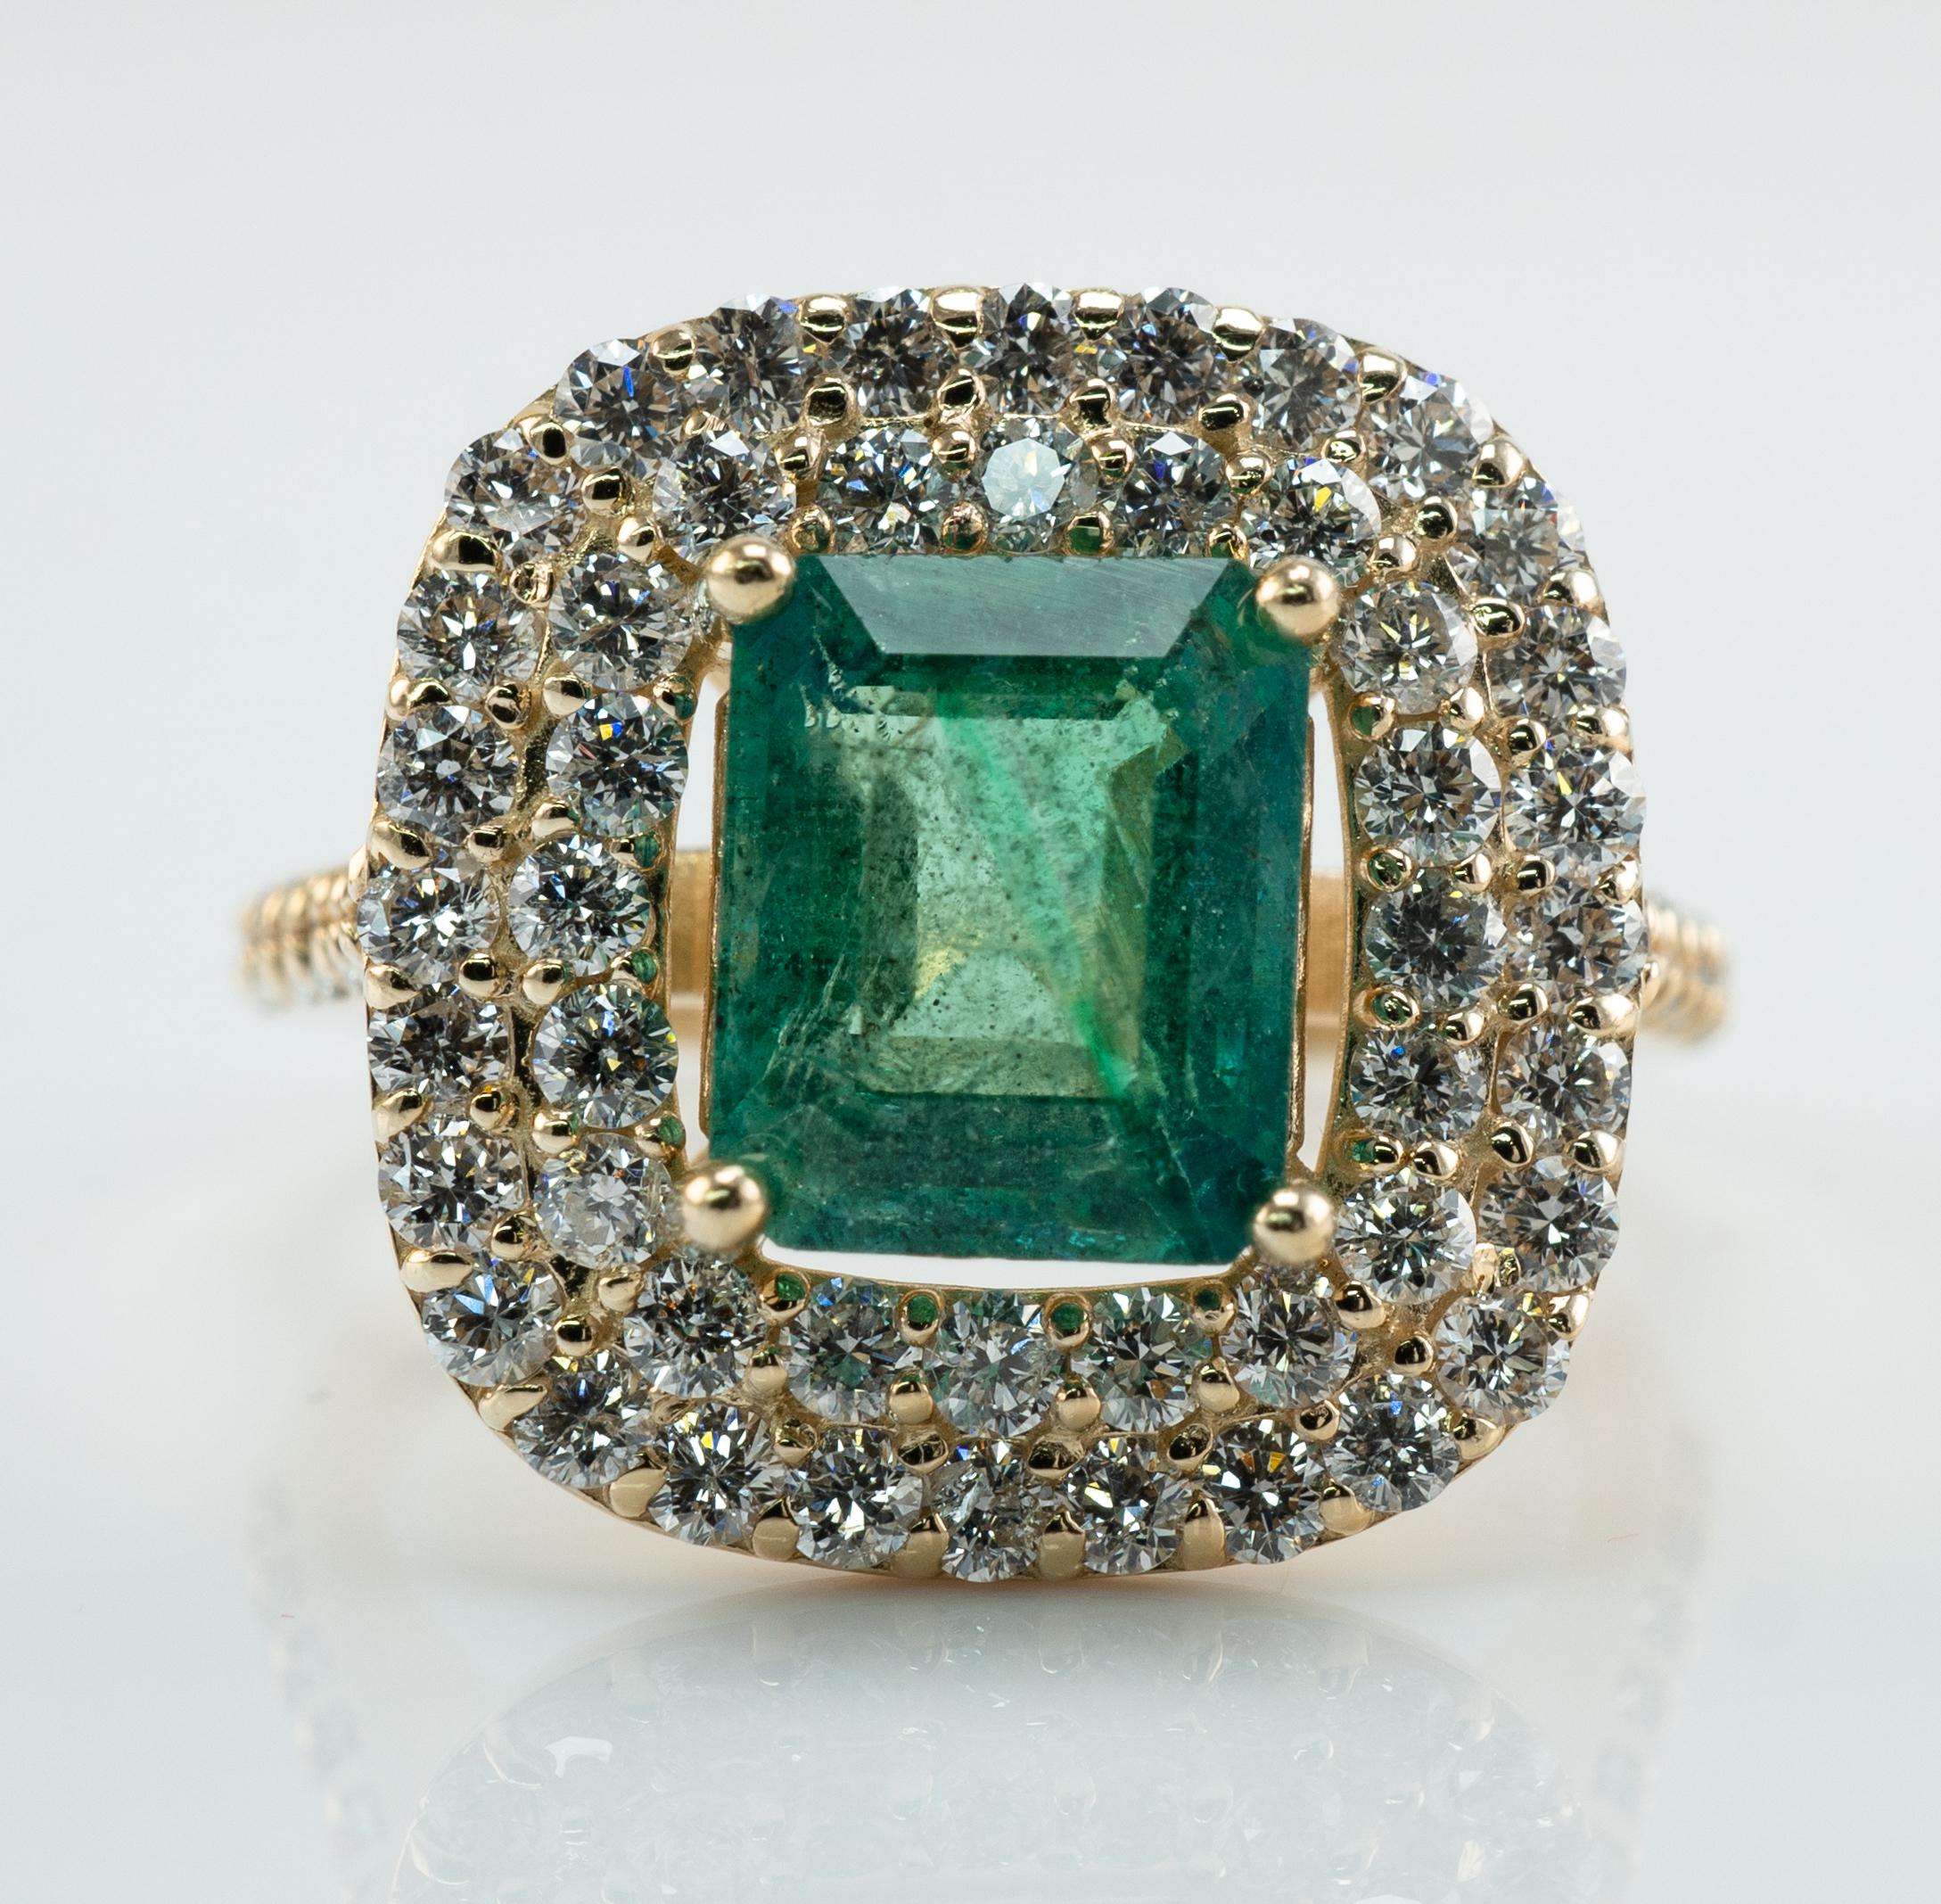 Natural Diamond Emerald Ring 18K Gold  Rectangle cut

This beautiful estate ring is finely crafted in solid 18K Yellow gold and set with genuine Earth mined Emerald and natural diamonds. The center rectable cut Emerald measures 8mm x 7mm (about 2.00